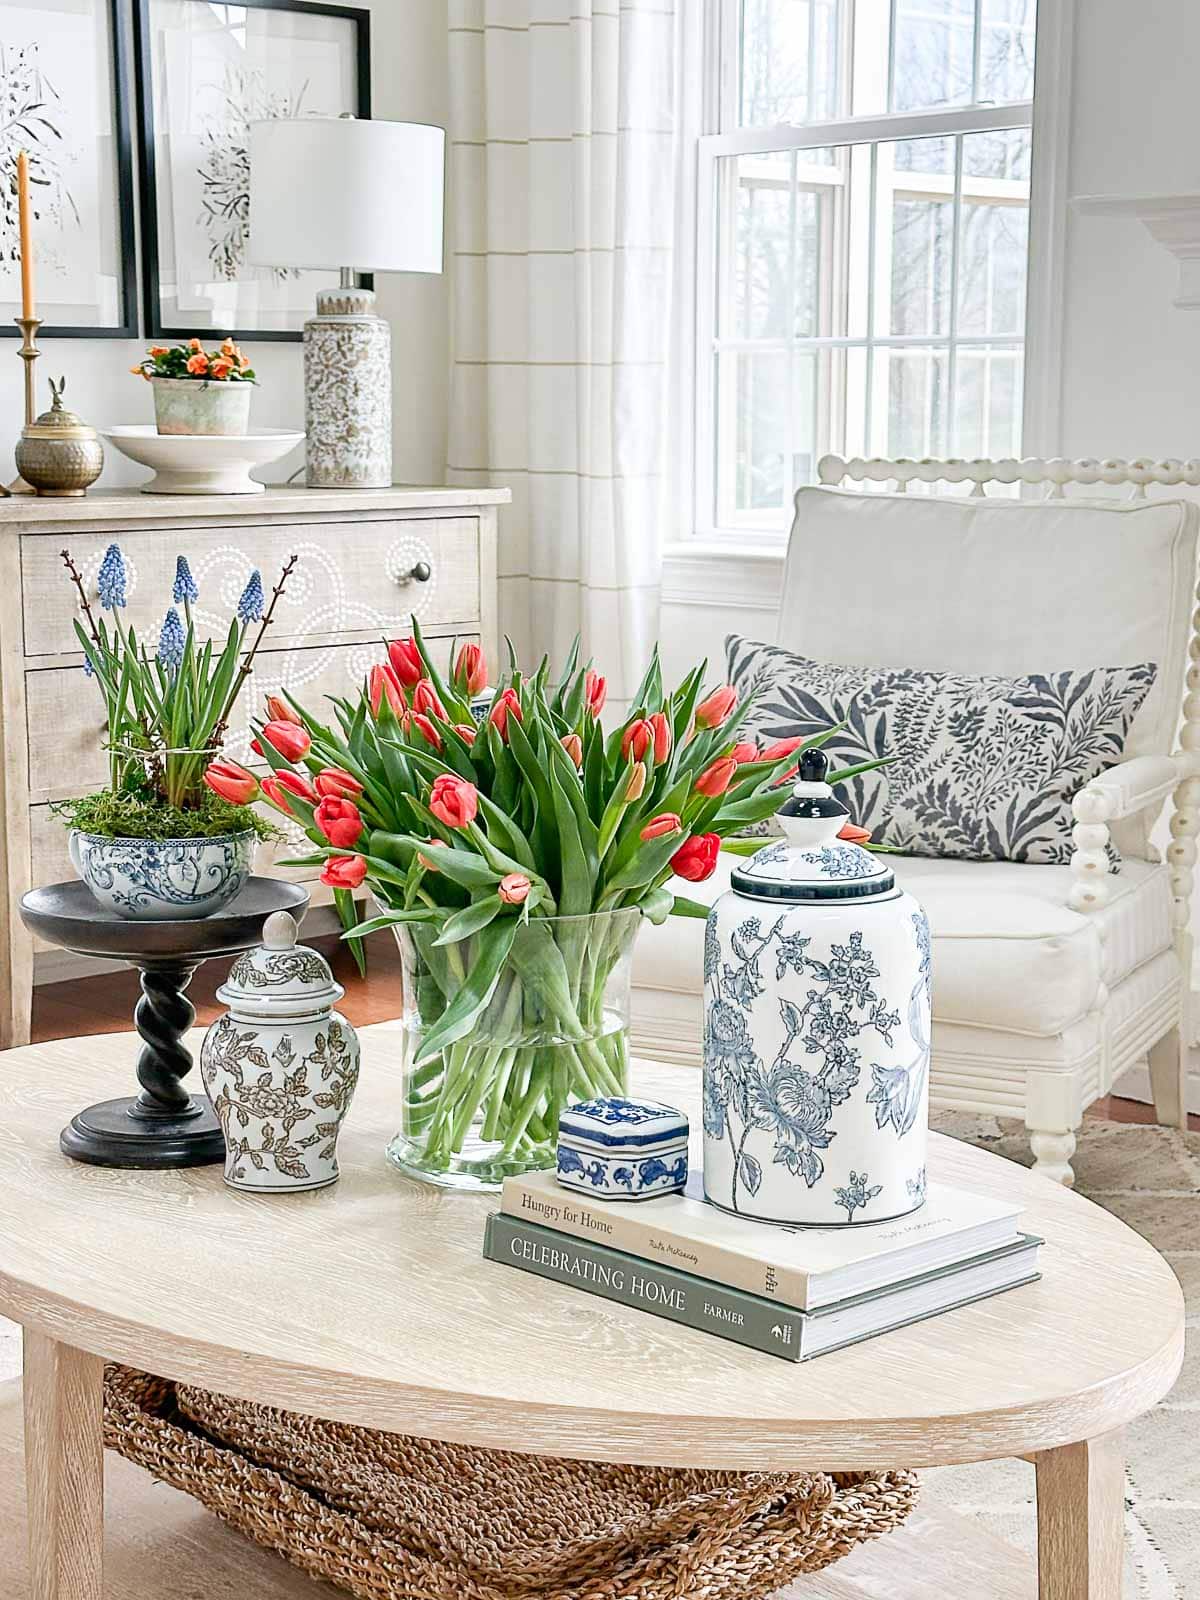 Spring Tour: How To Use Organics To Decorate Your Home For Spring